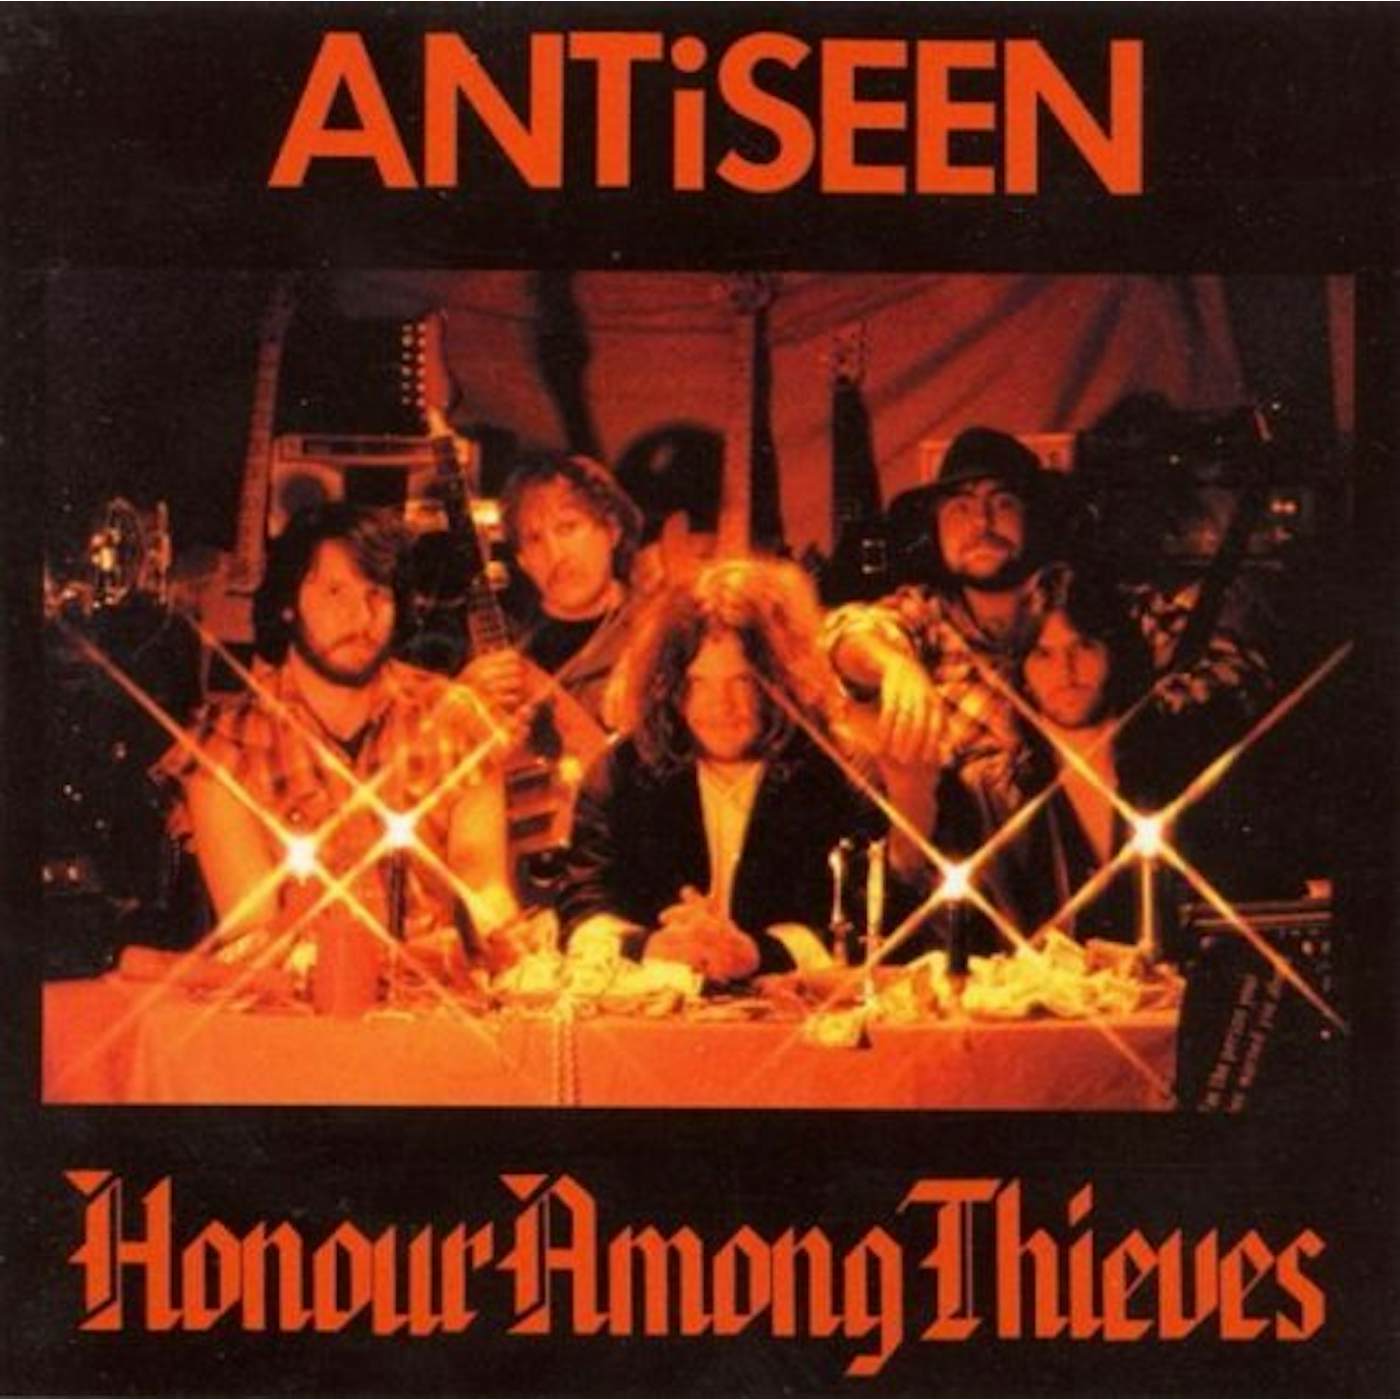 Antiseen HONOUR AMONG THIEVES CD